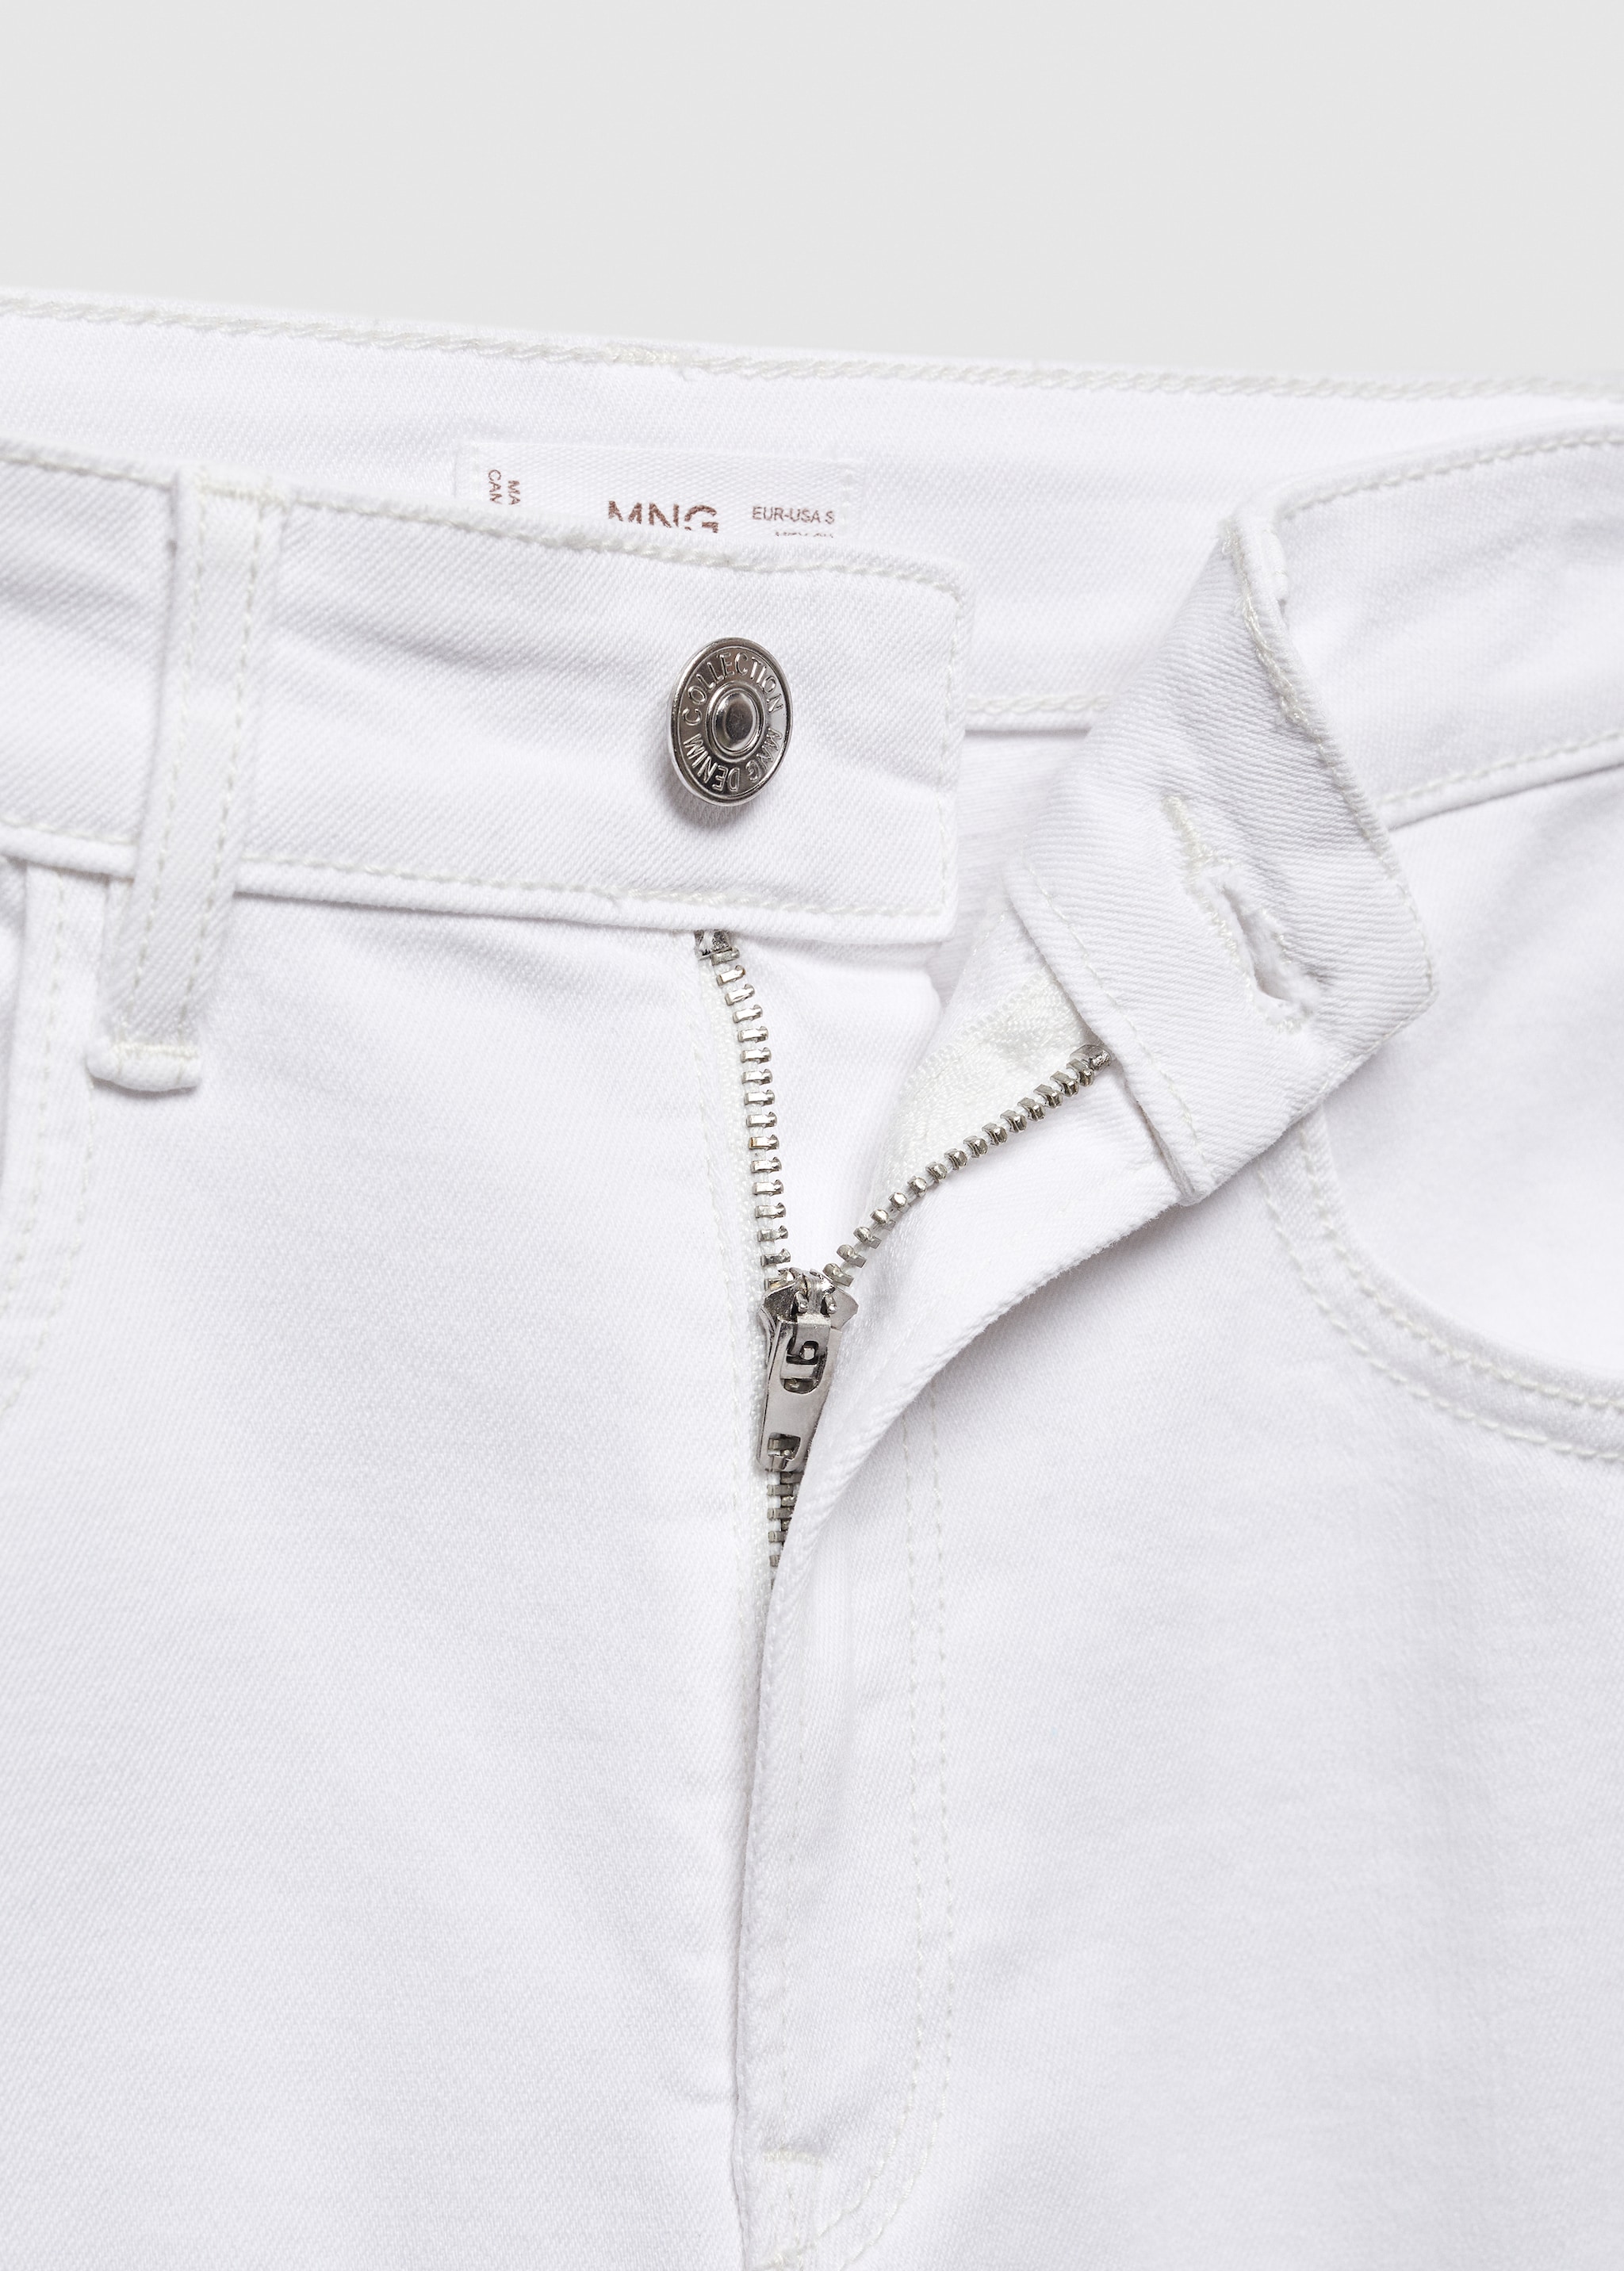 Skinny jeans - Details of the article 8